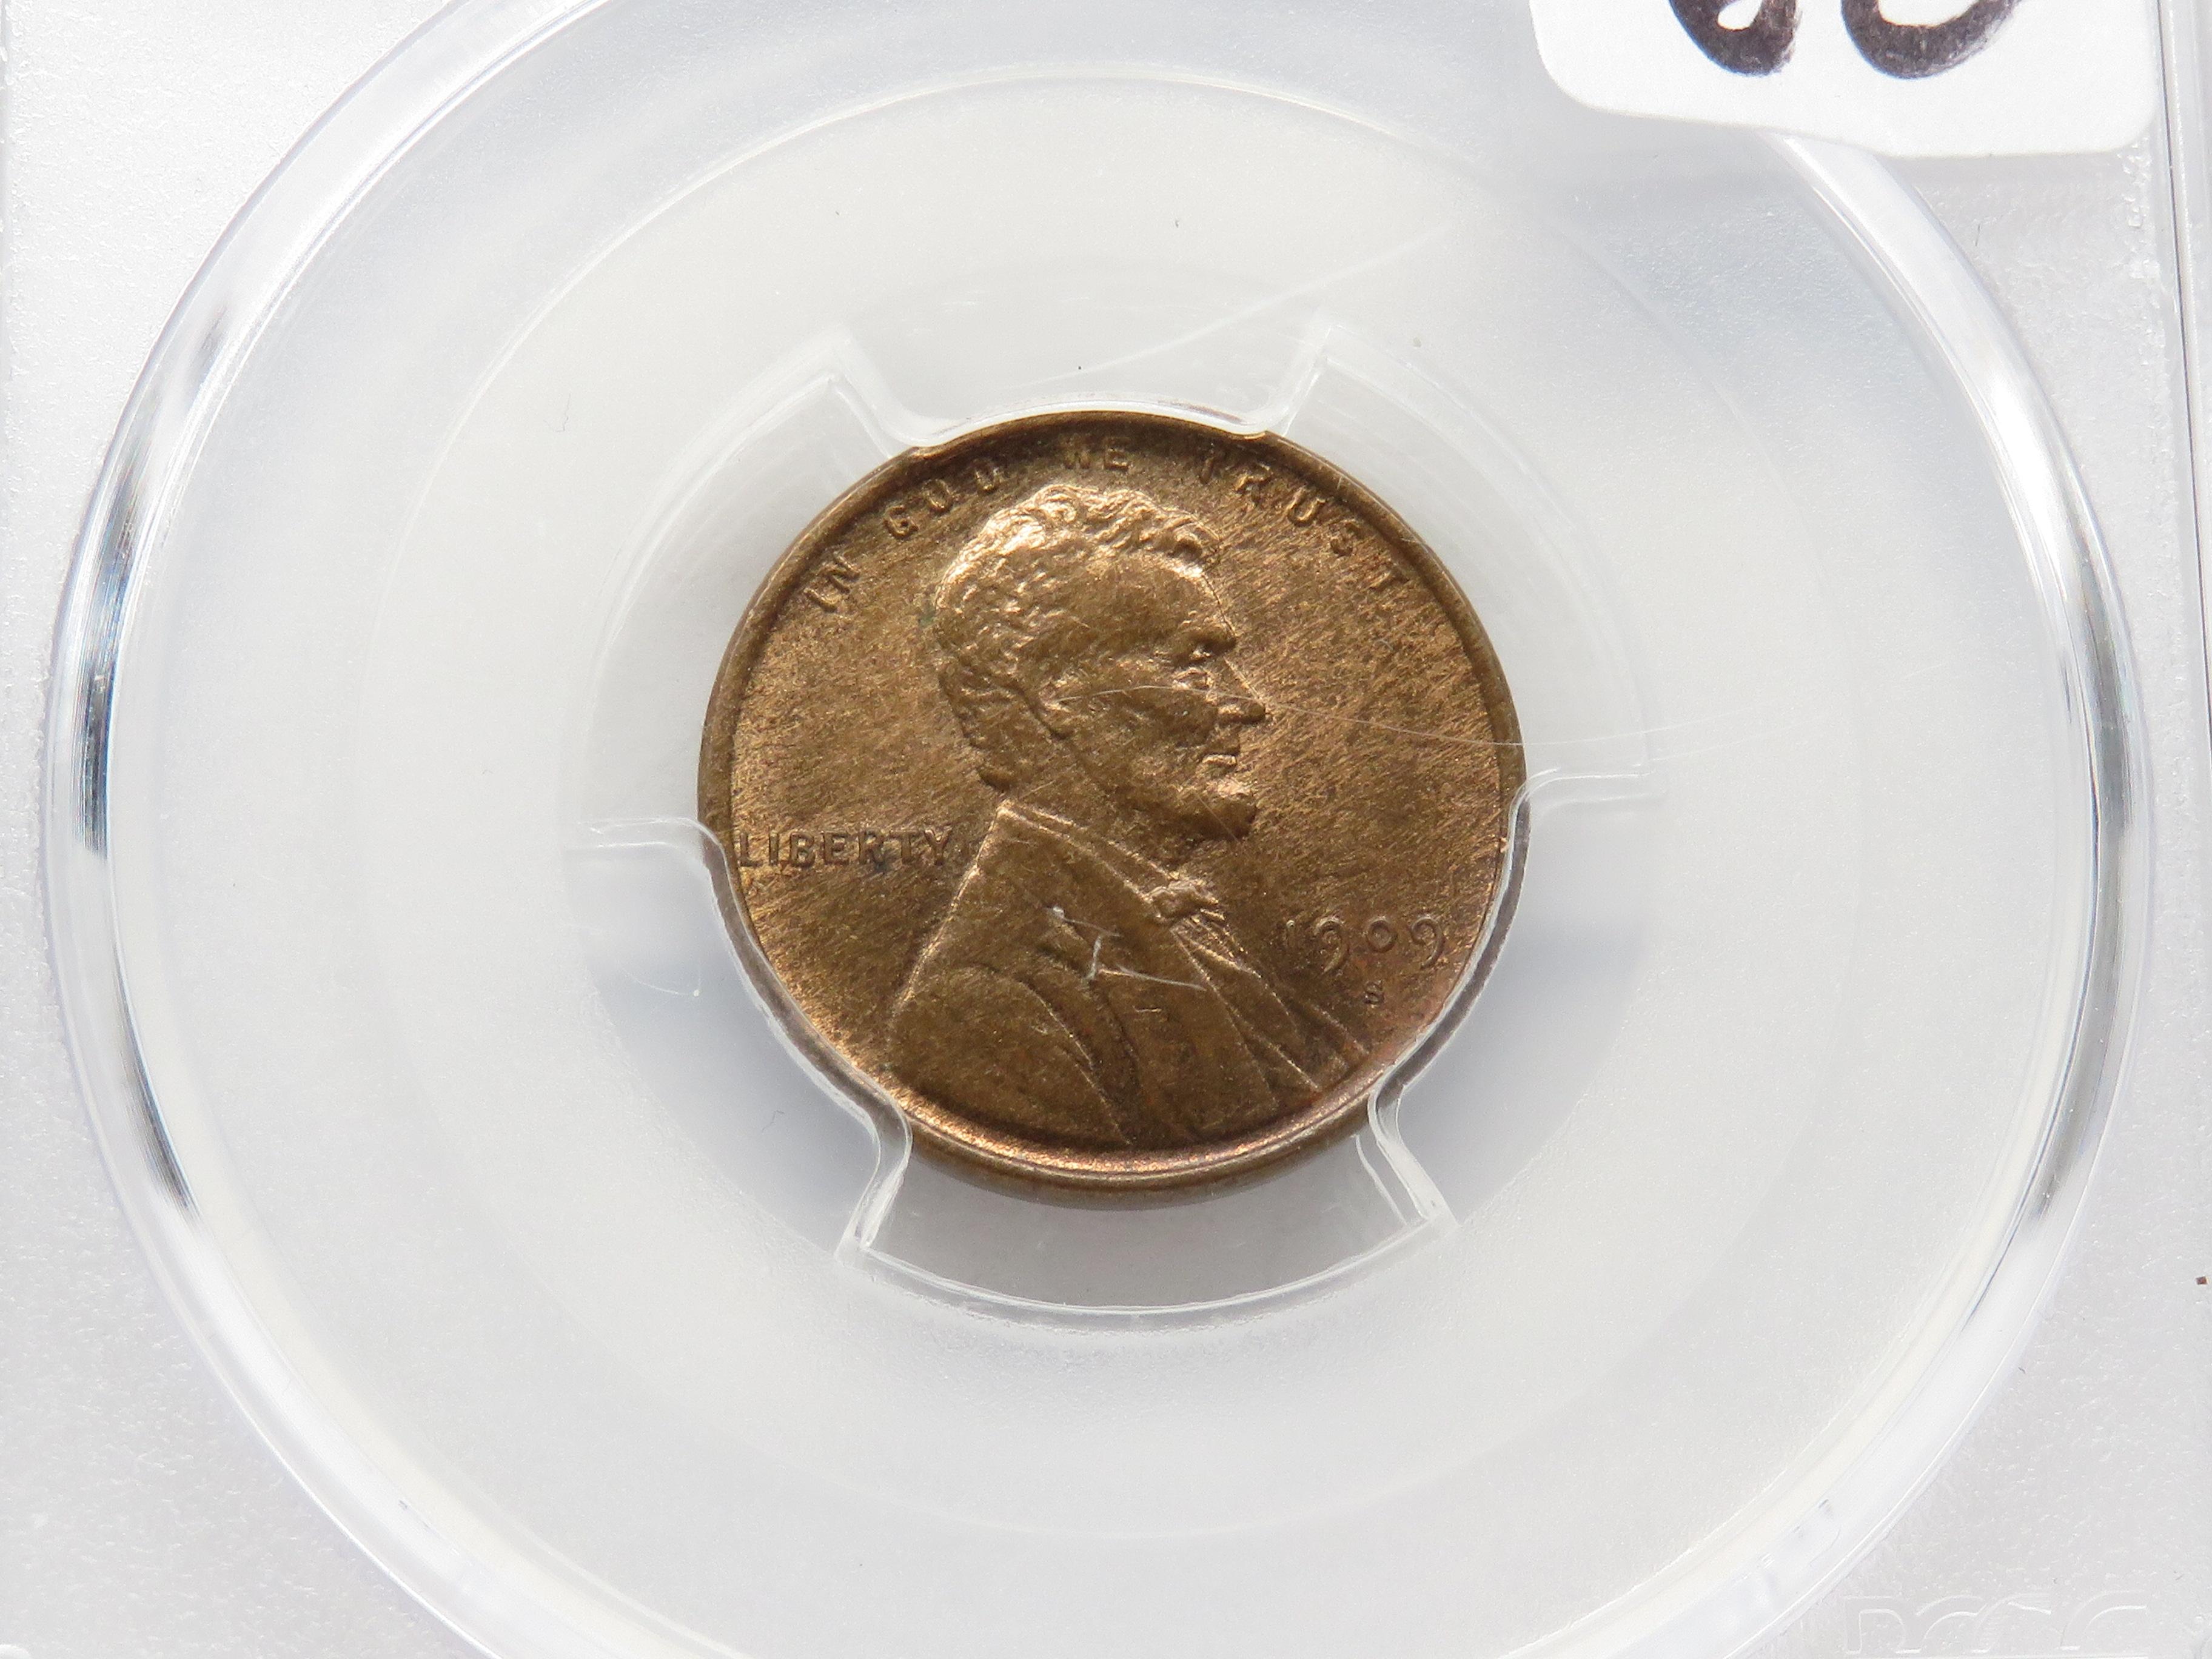 Lincoln Cent 1909-S PCGS MS64RB (Better date)